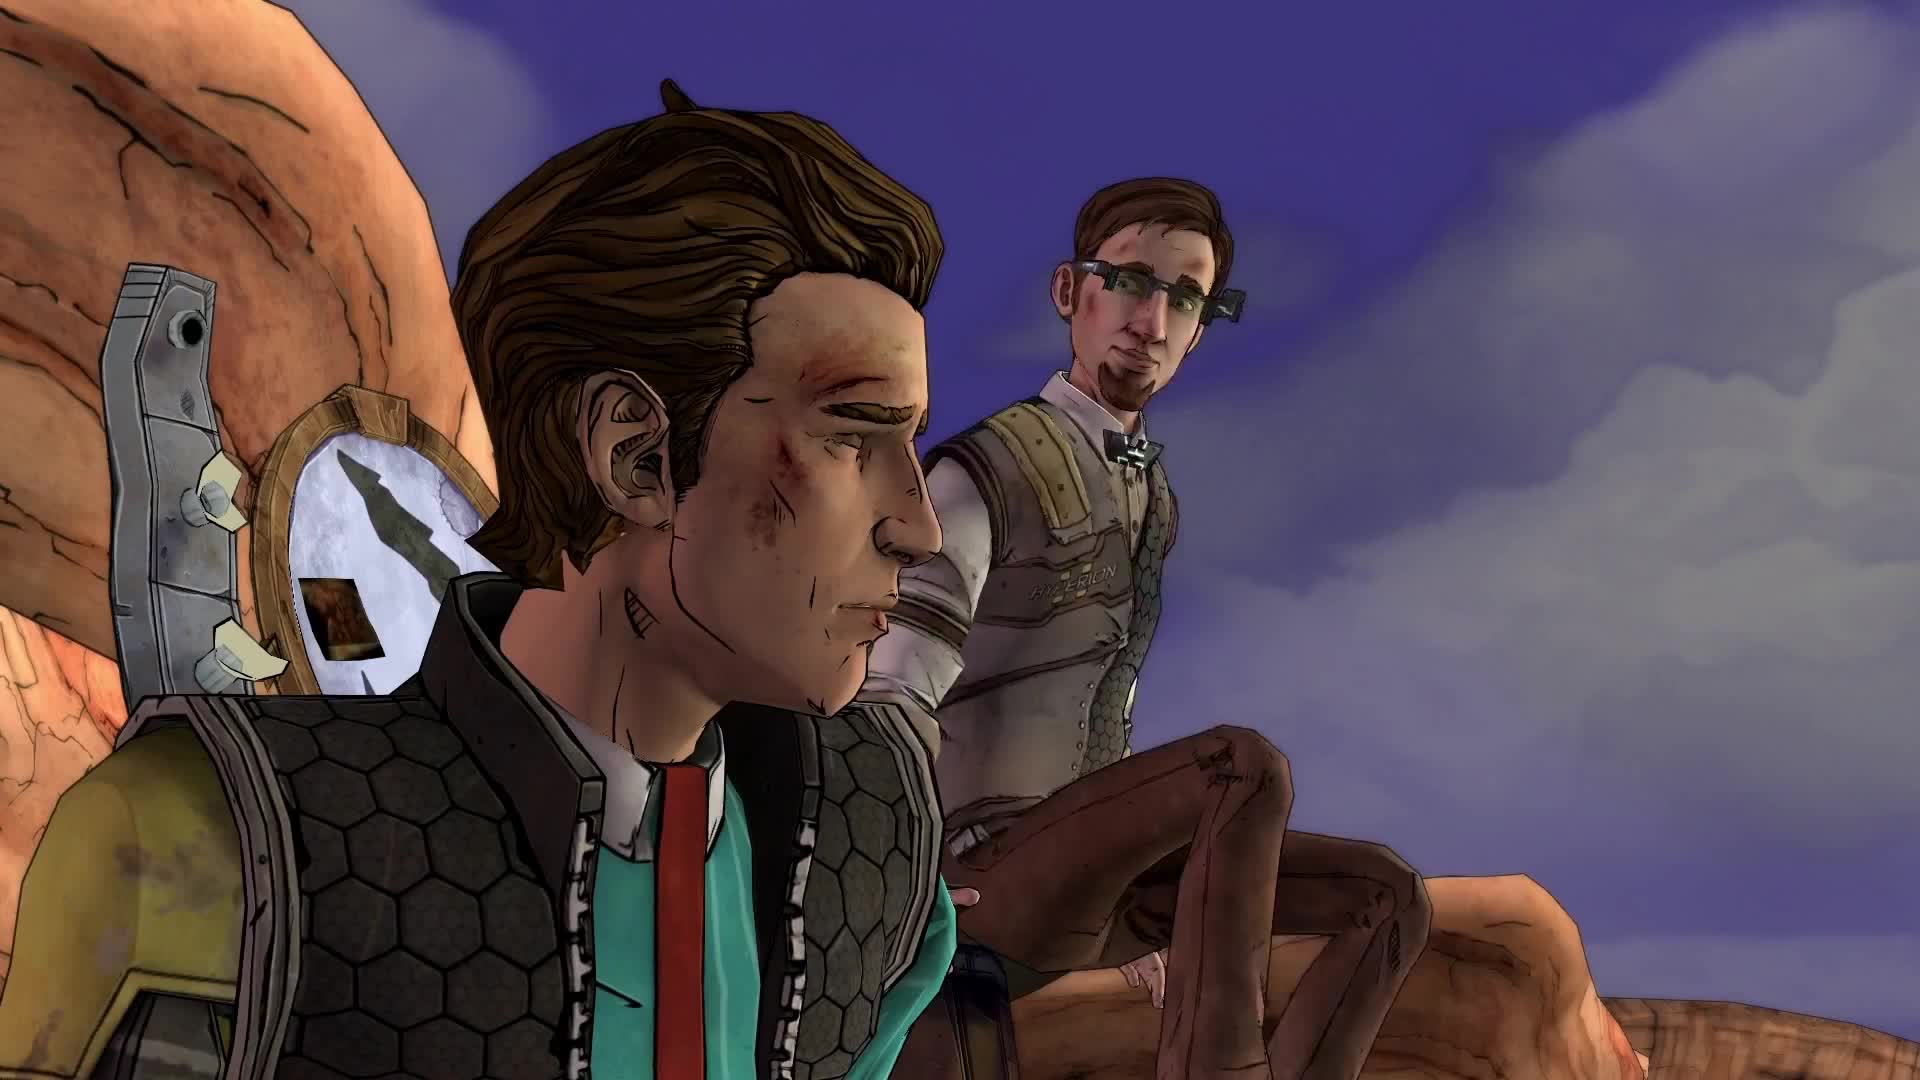 Tales from the Borderlands - Episode 2 Trailer